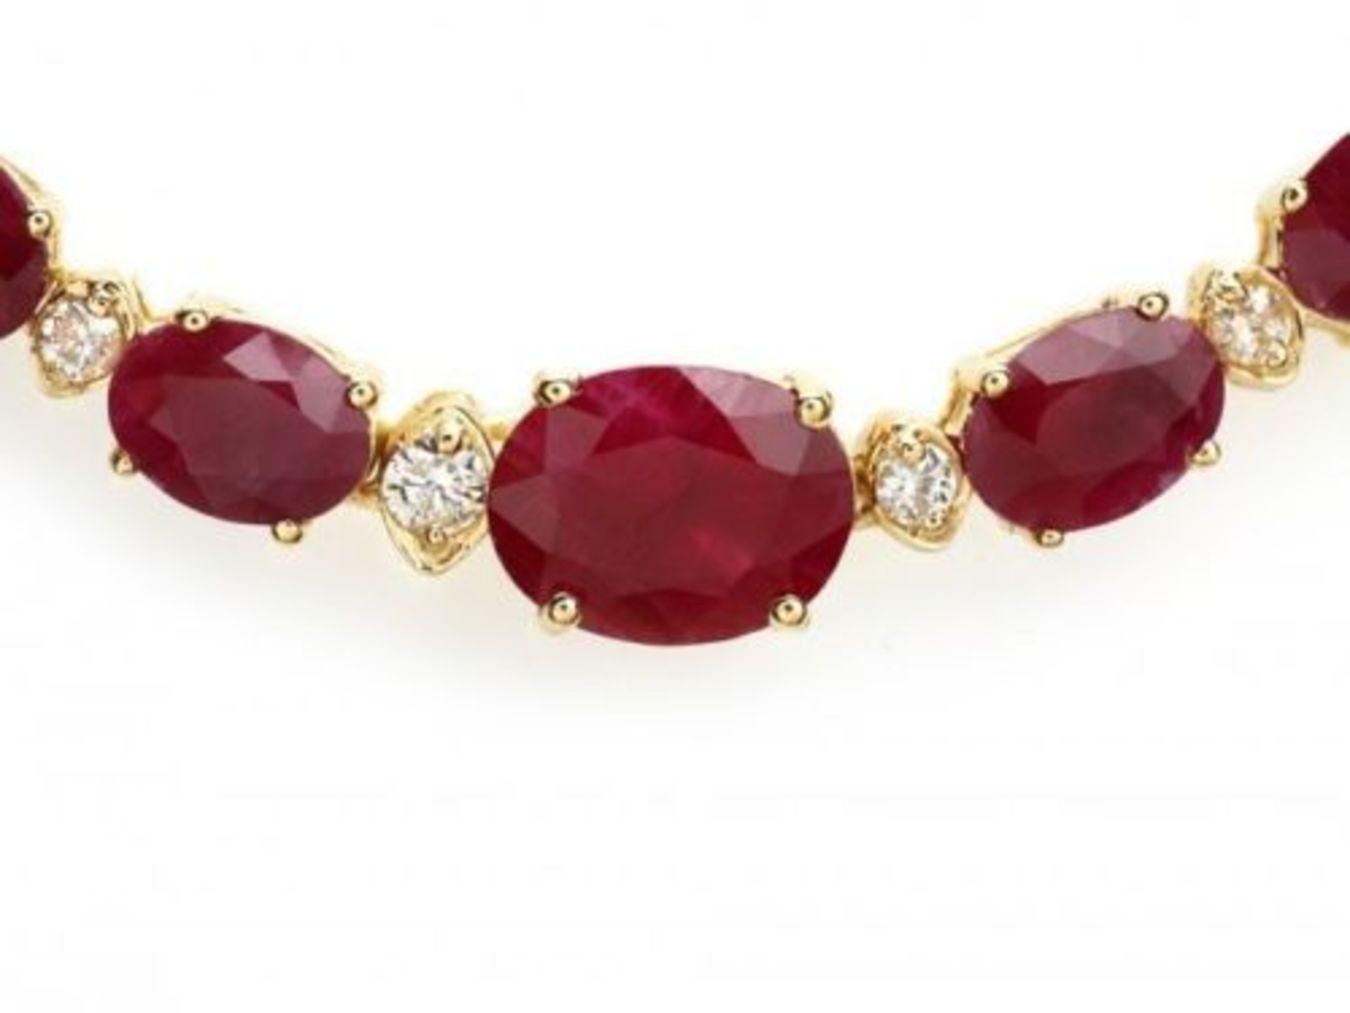 14K Yellow Gold 32.20ct Ruby and 1.35ct Diamond Necklace